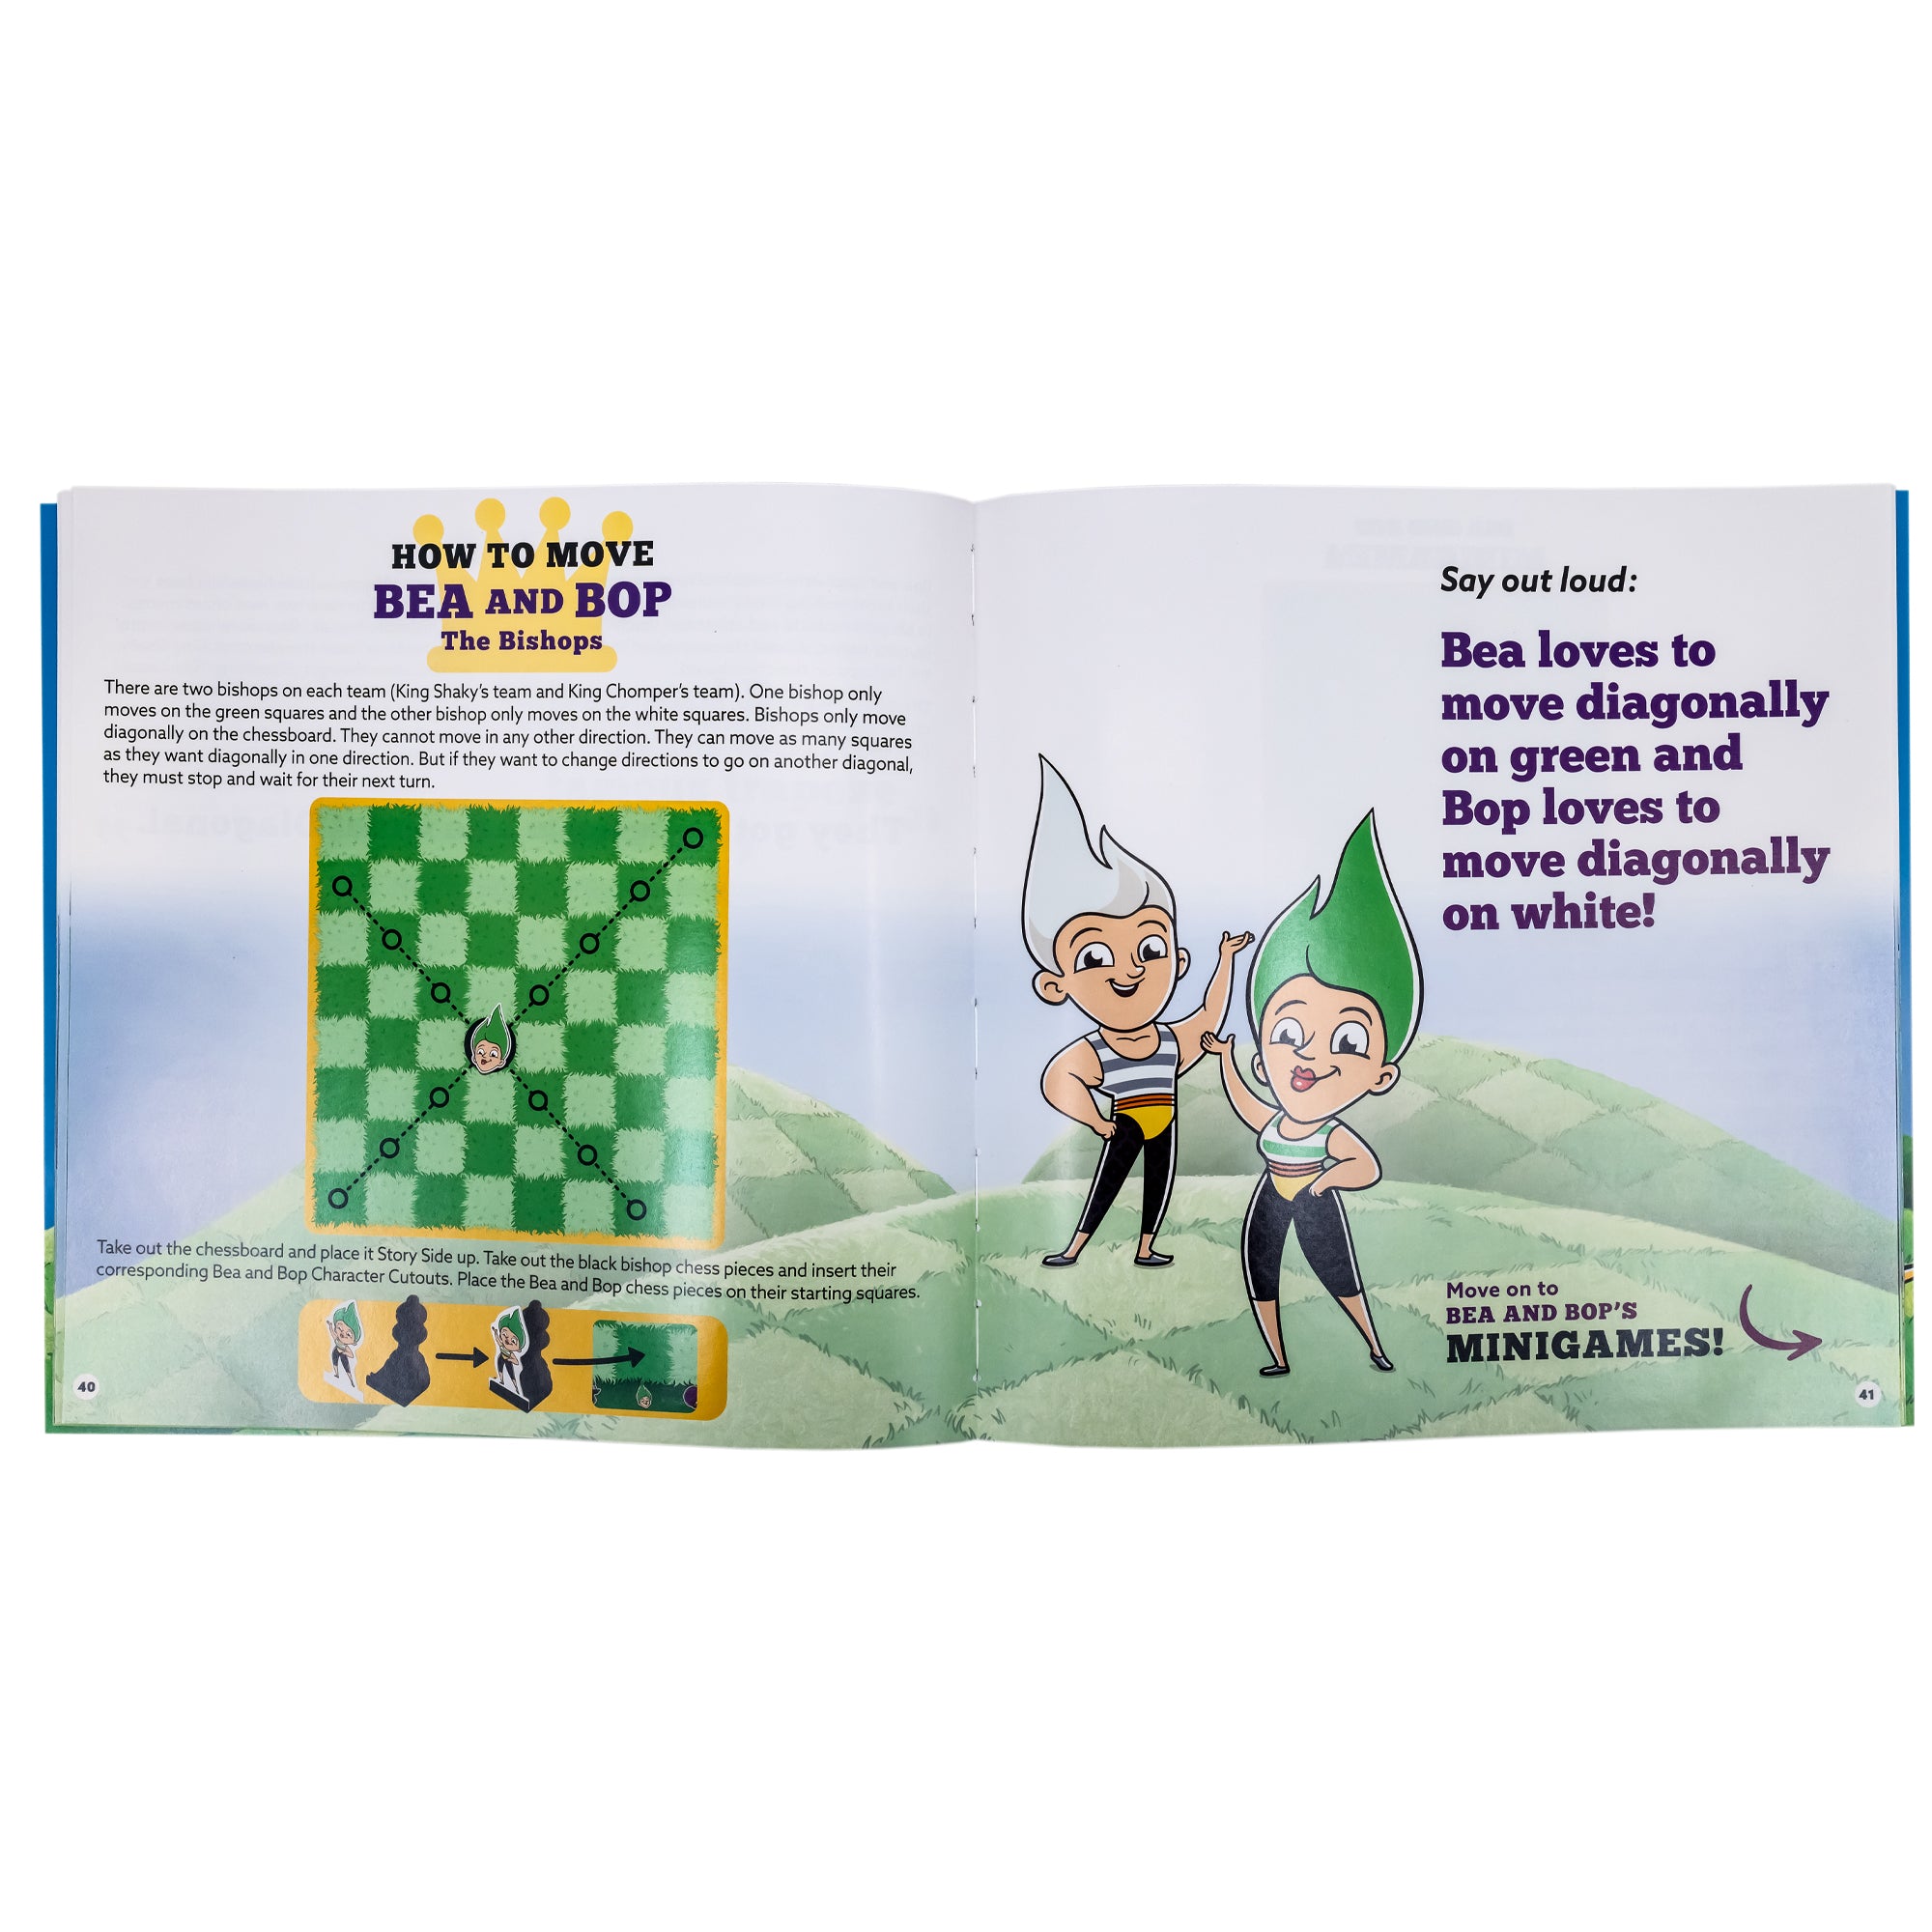 Story Time Chess instruction book open to show “How to Move Bea and Bop, The Bishops.” This title is written over a yellow crown icon. Under the title and some text is an illustration of the dark and light checkered game board. There is a character image and arrows pointing in the directions they are allowed to move. There is another instructional image at the bottom of the left page. On the right are Bea and Bop standing on the patch work, green, grassy hills, waving.